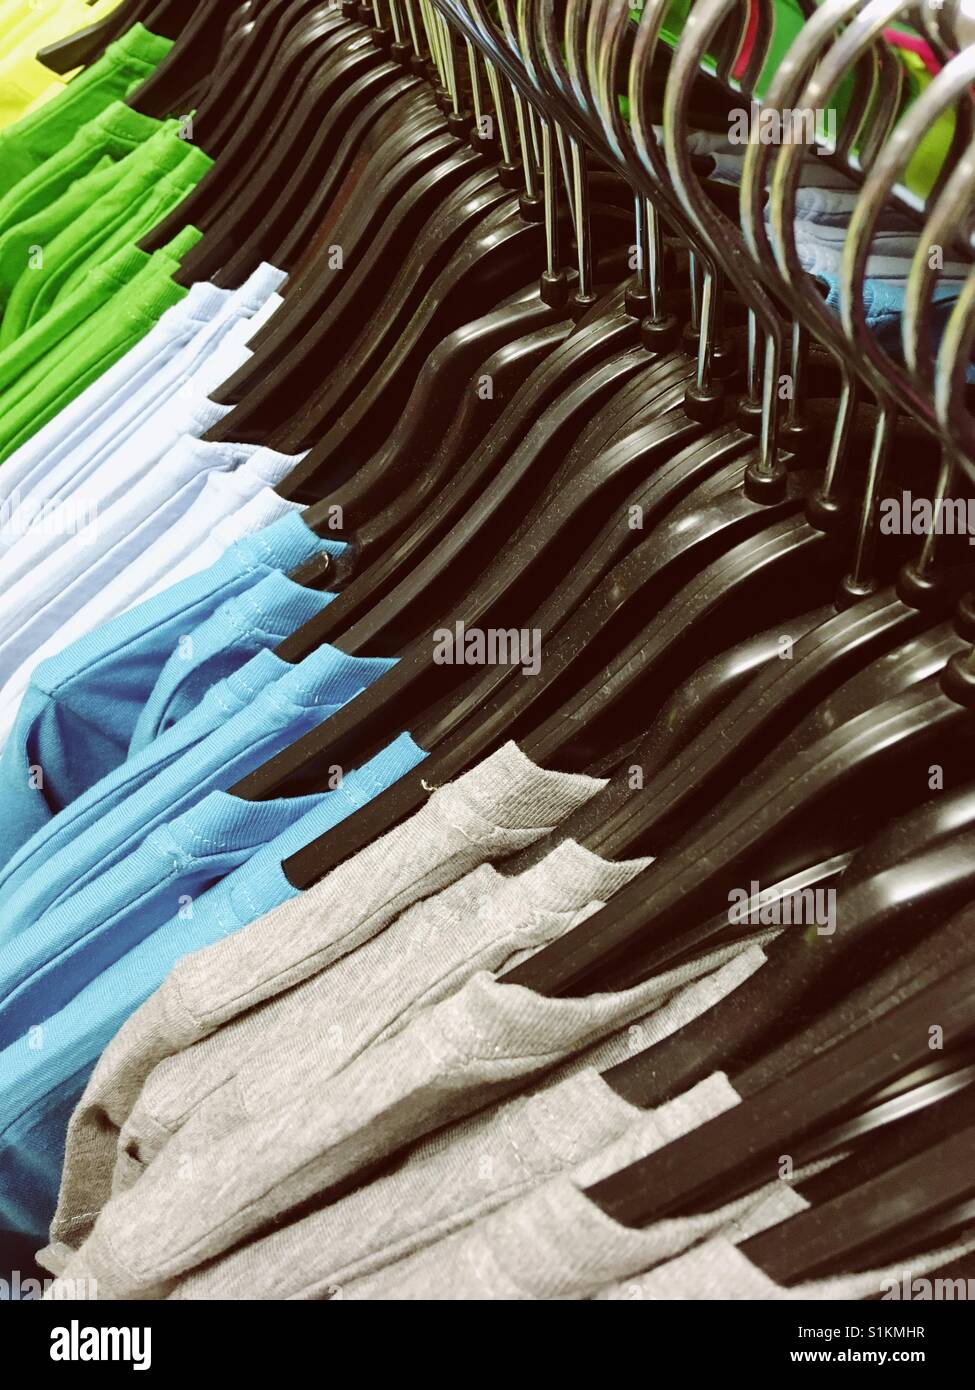 Row Bright Shirts Hangers Stock Photo by ©weerapat 161506424